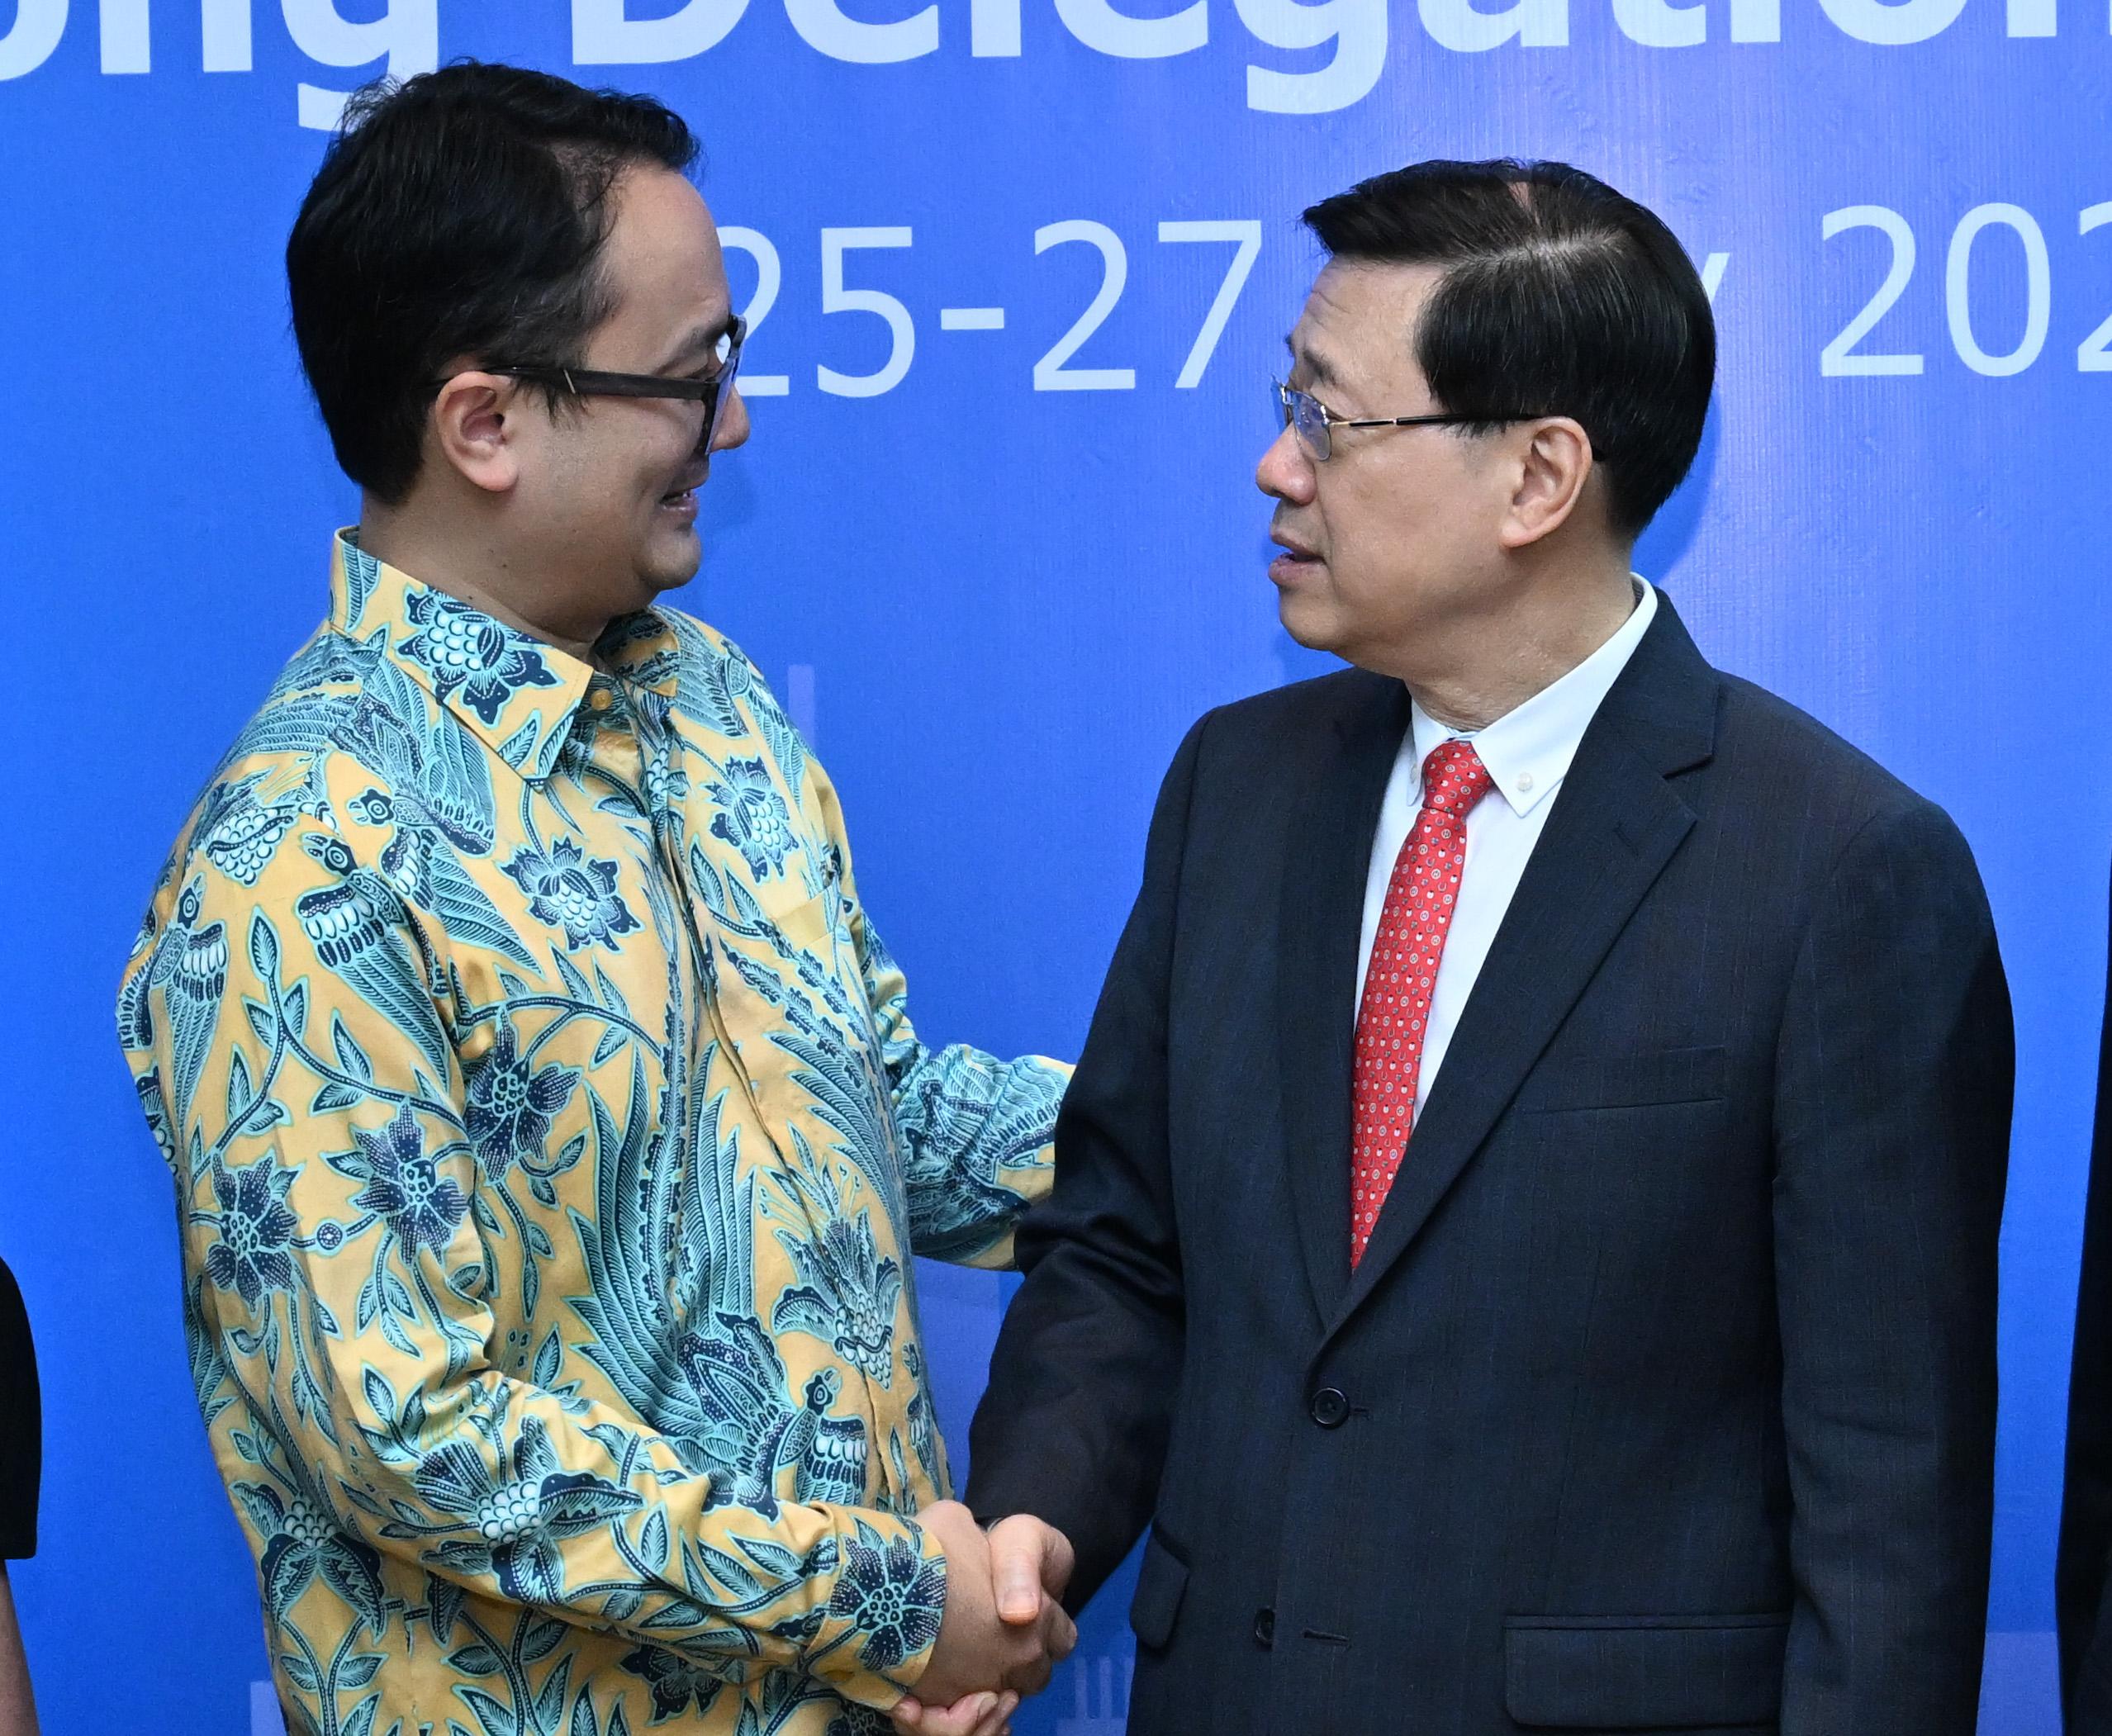 The Chief Executive, Mr John Lee, attended a business luncheon jointly organised by the Hong Kong Special Administrative Region Government and the Hong Kong Trade Development Council in Jakarta, Indonesia, today (July 26). Photo shows Mr Lee (right) and the Vice Minister of Trade of Indonesia, Dr Jerry Sambuaga (left).